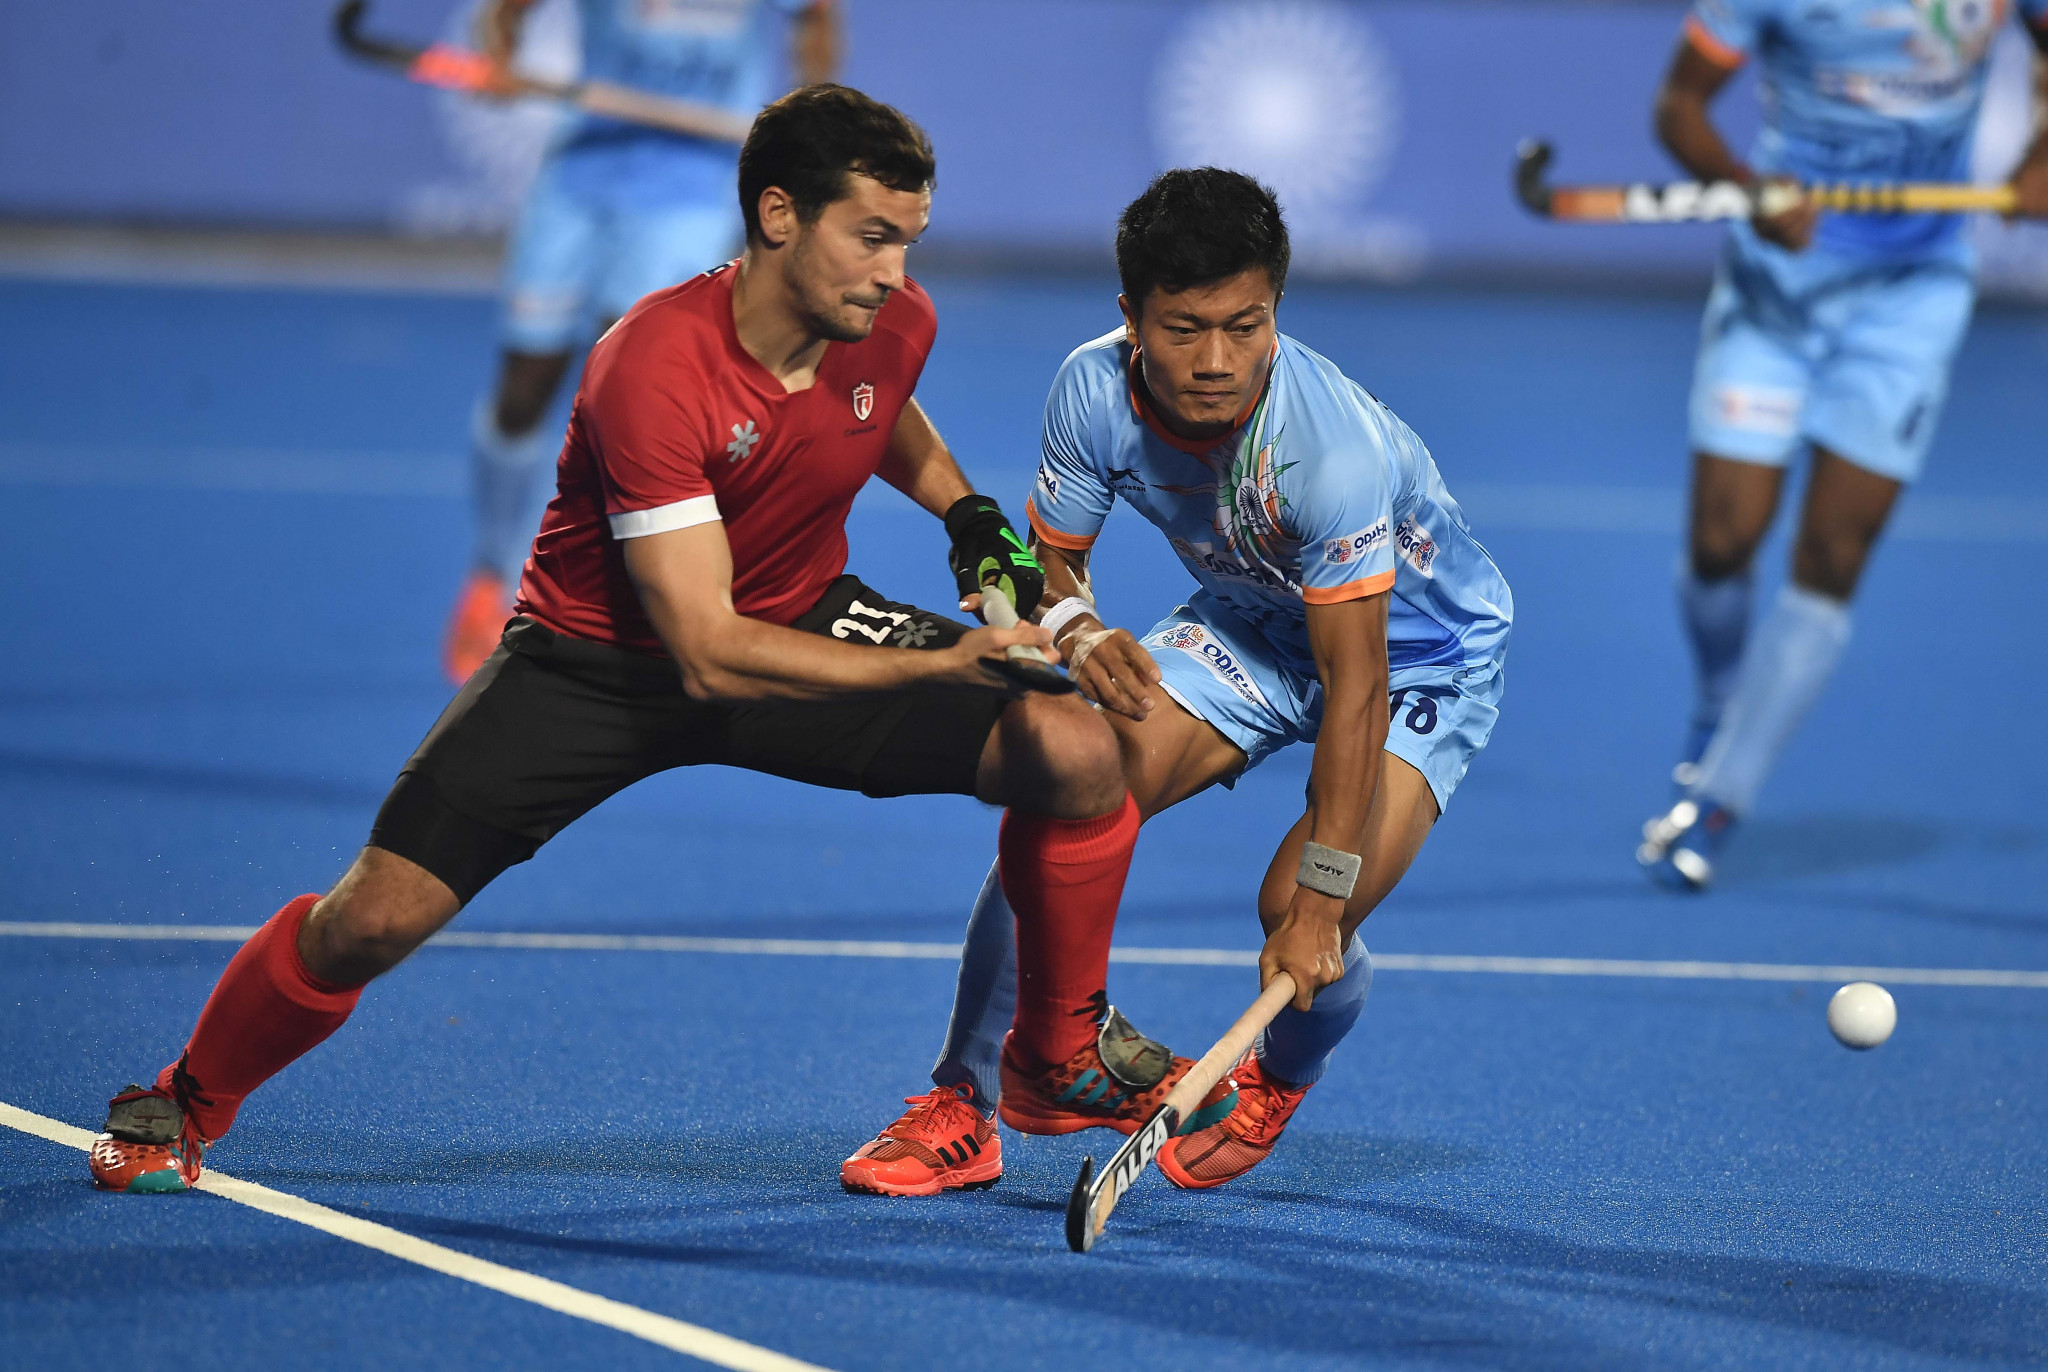 India thrashed Canada to reach the quarter-finals ©Getty Images